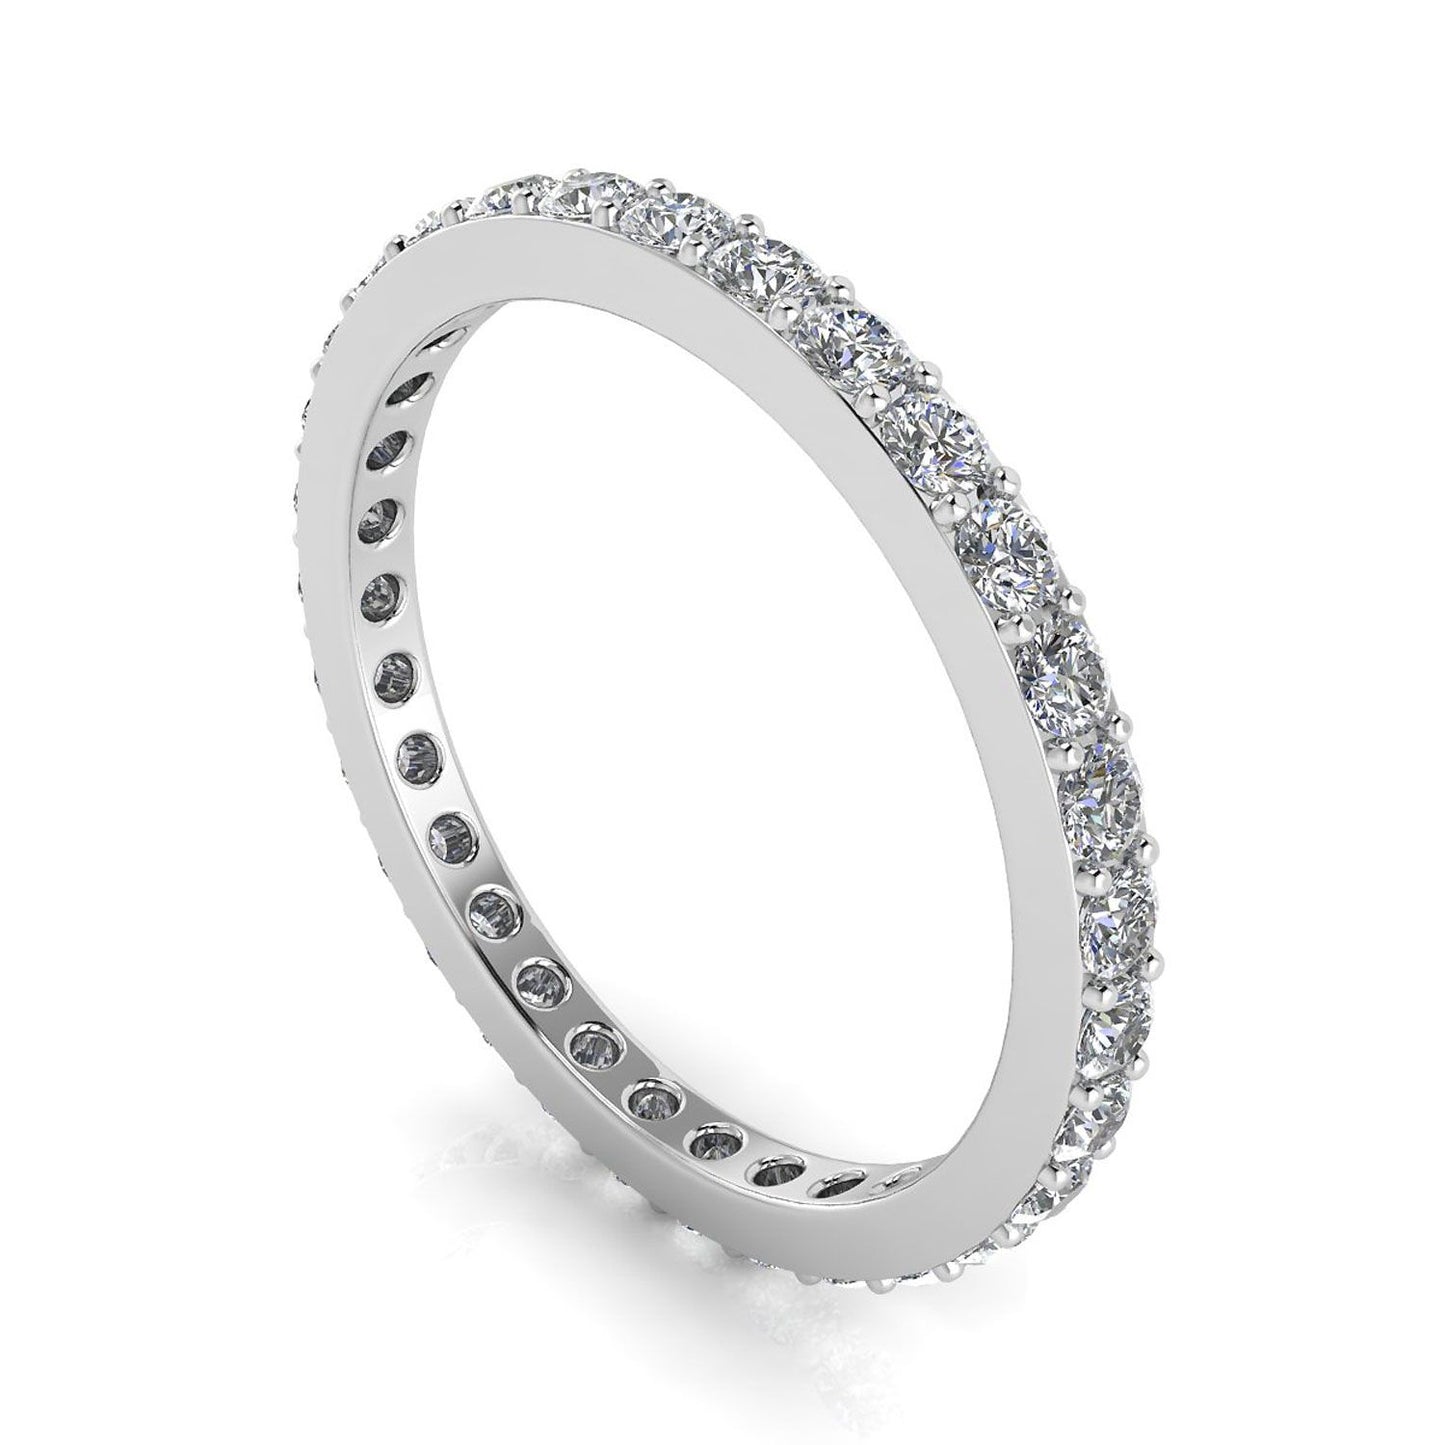 Round Brilliant Cut Diamond Pave Set Eternity Ring In 14k White Gold  (0.66ct. Tw.) Ring Size 5.5